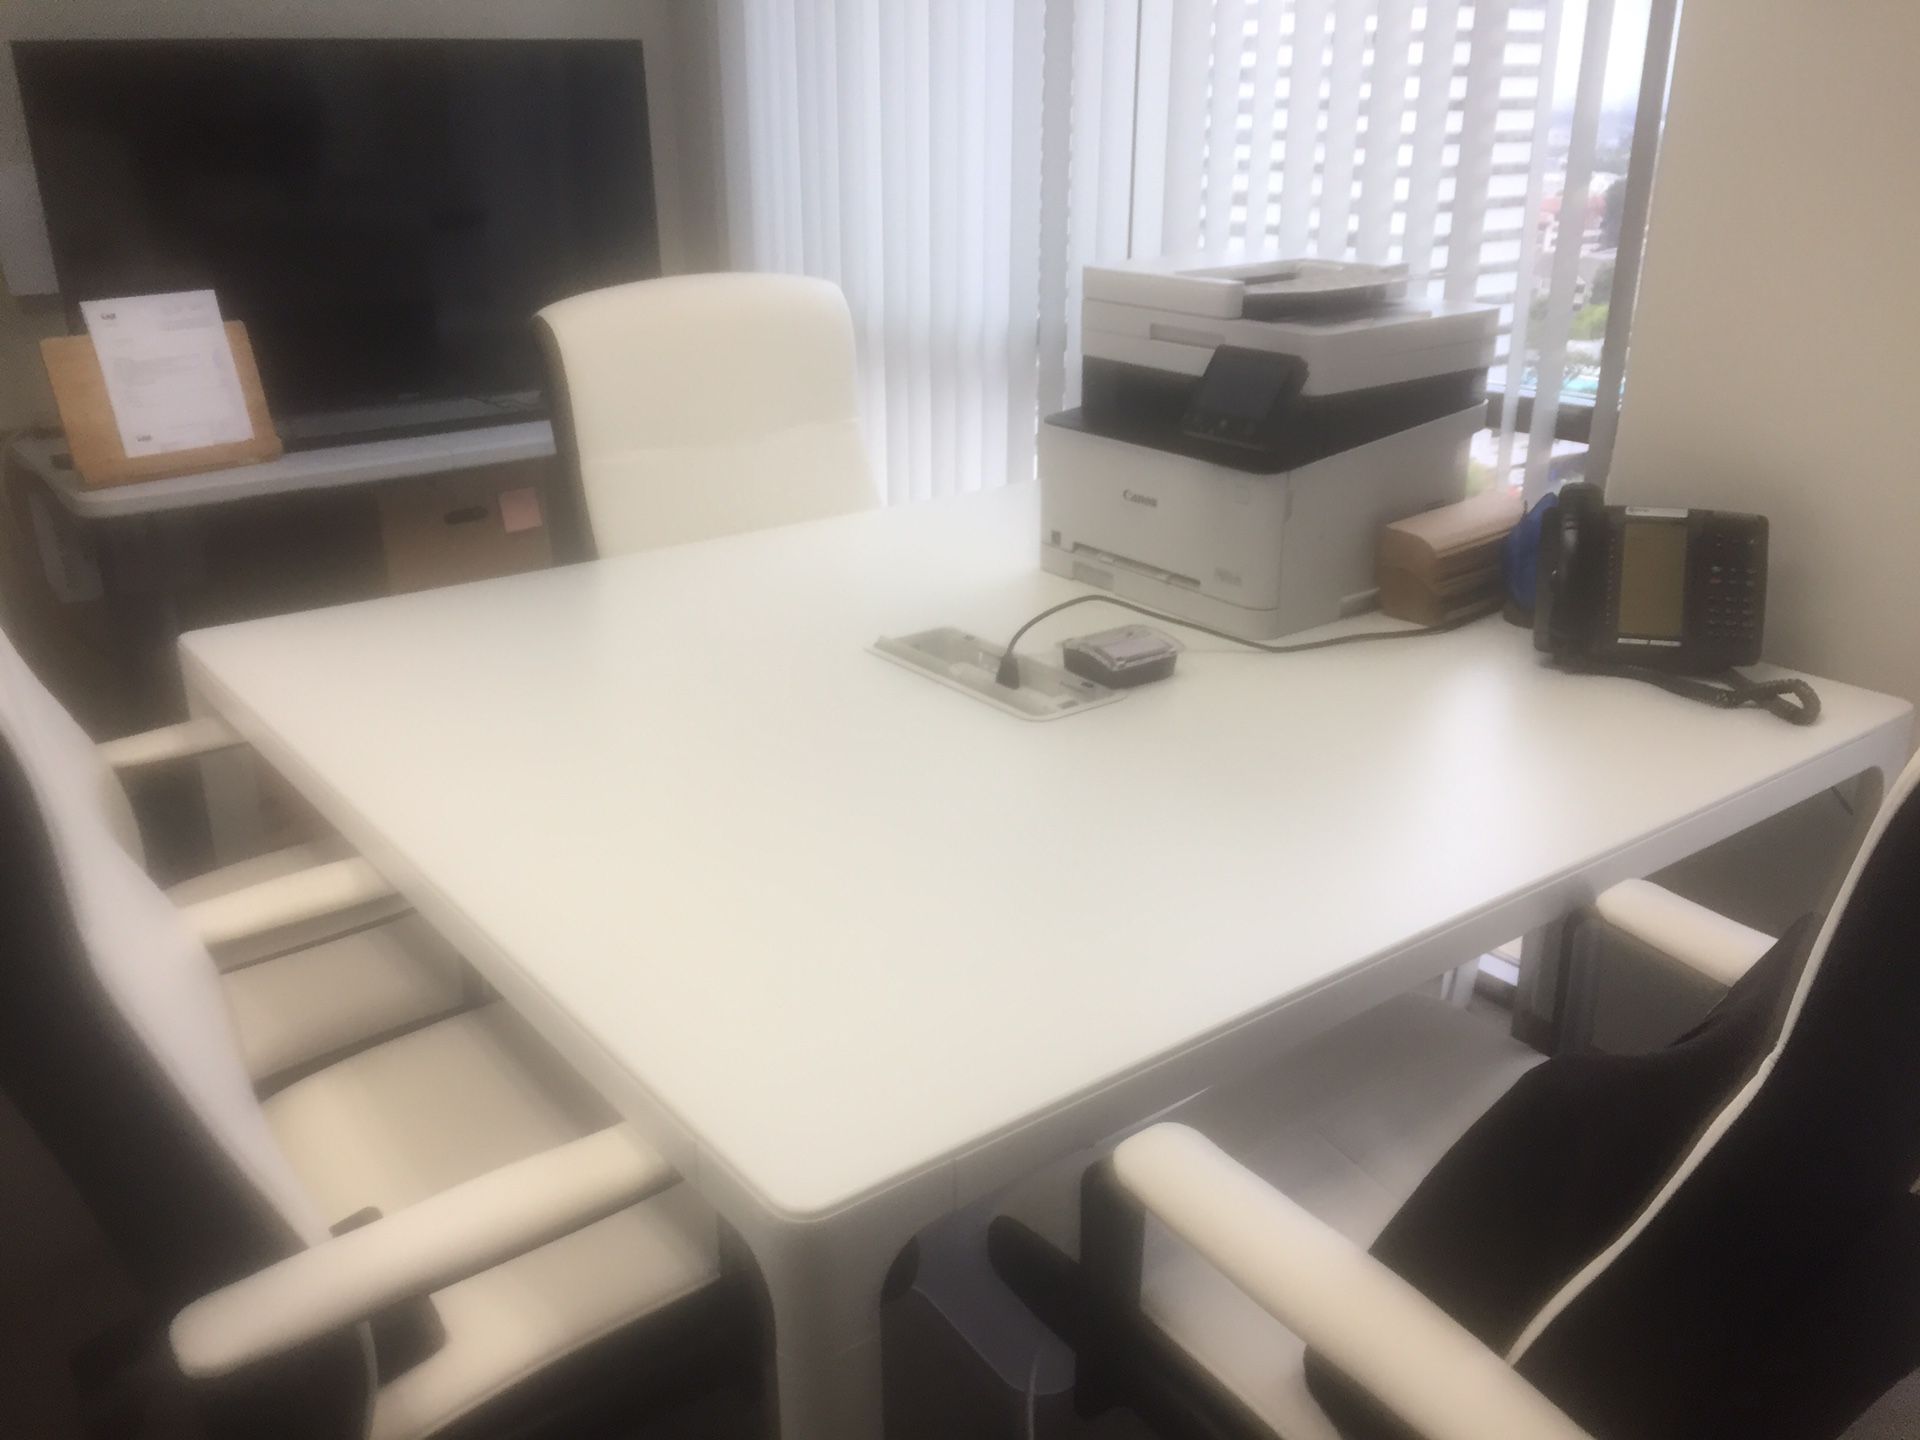 IKEA Office furniture (1 table & 4 chairs) excluding a printer & telephone